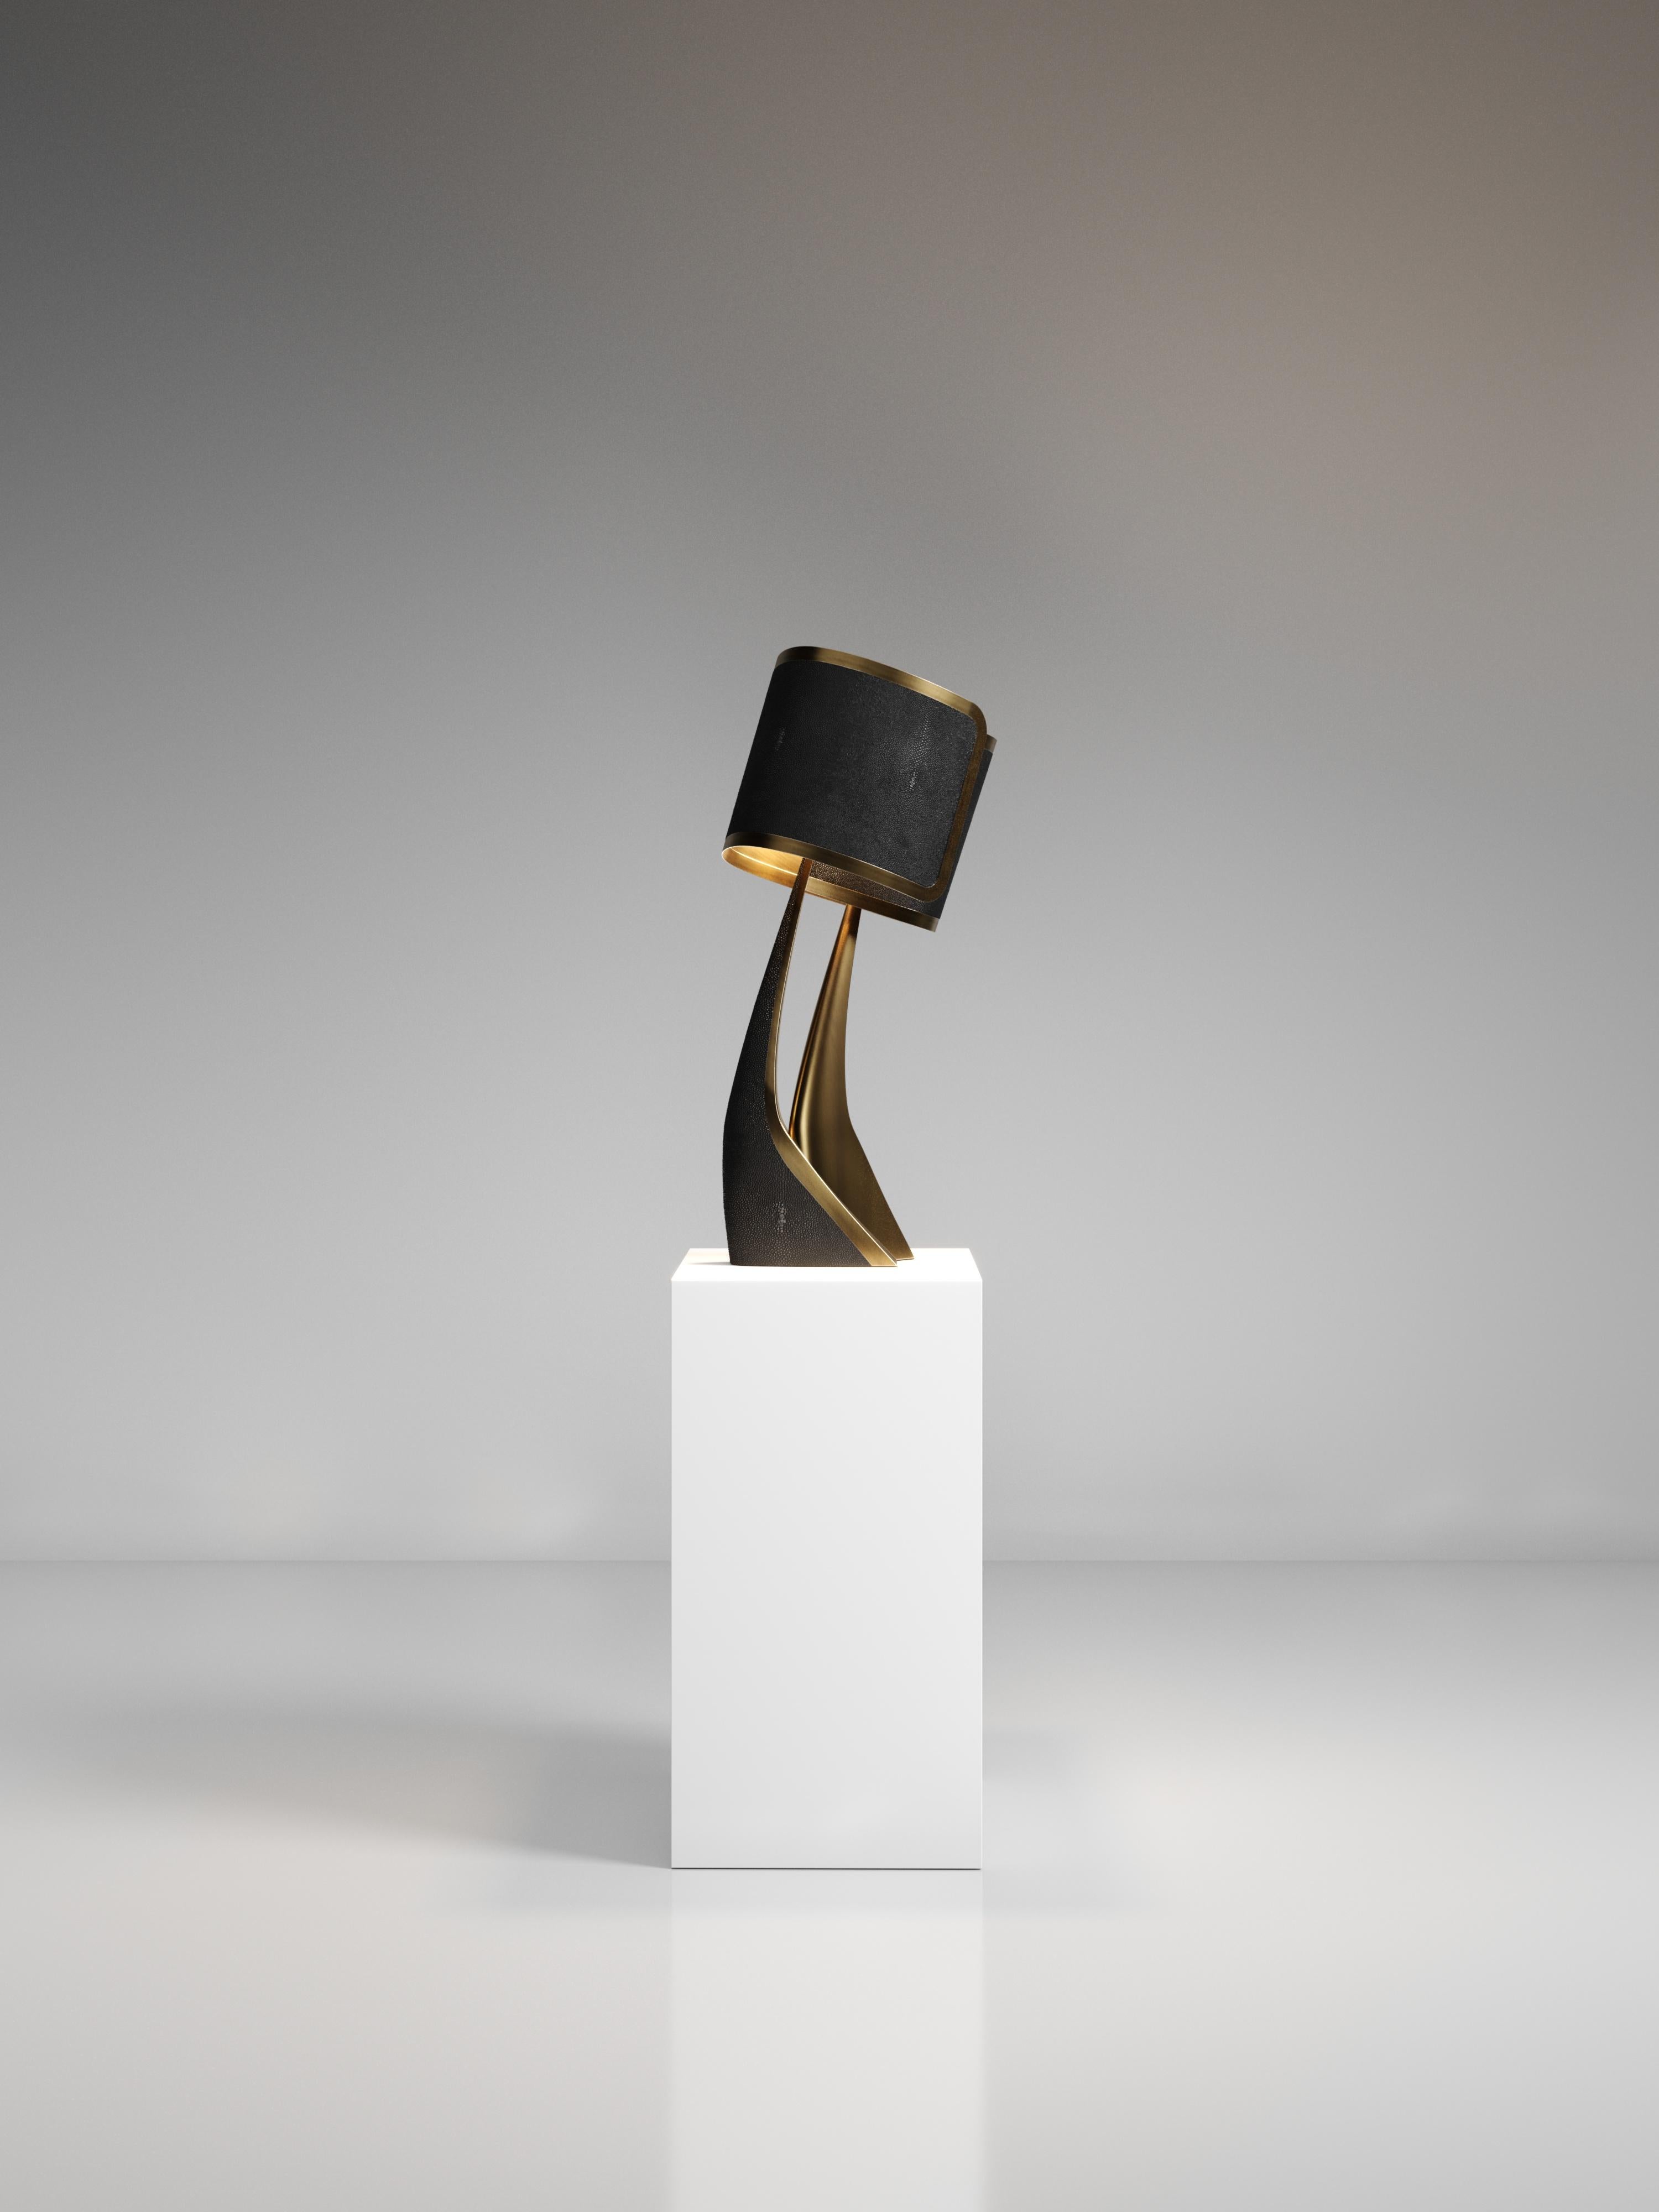 The Chital III Table Lamp by Kifu Paris is a sleek and sculptural piece, inlaid in a mixture of bronze-patina brass and cream shagreen. The chiseled legs, which are an iconic shape within the KIFU PARIS universe, morph into the solid shades that